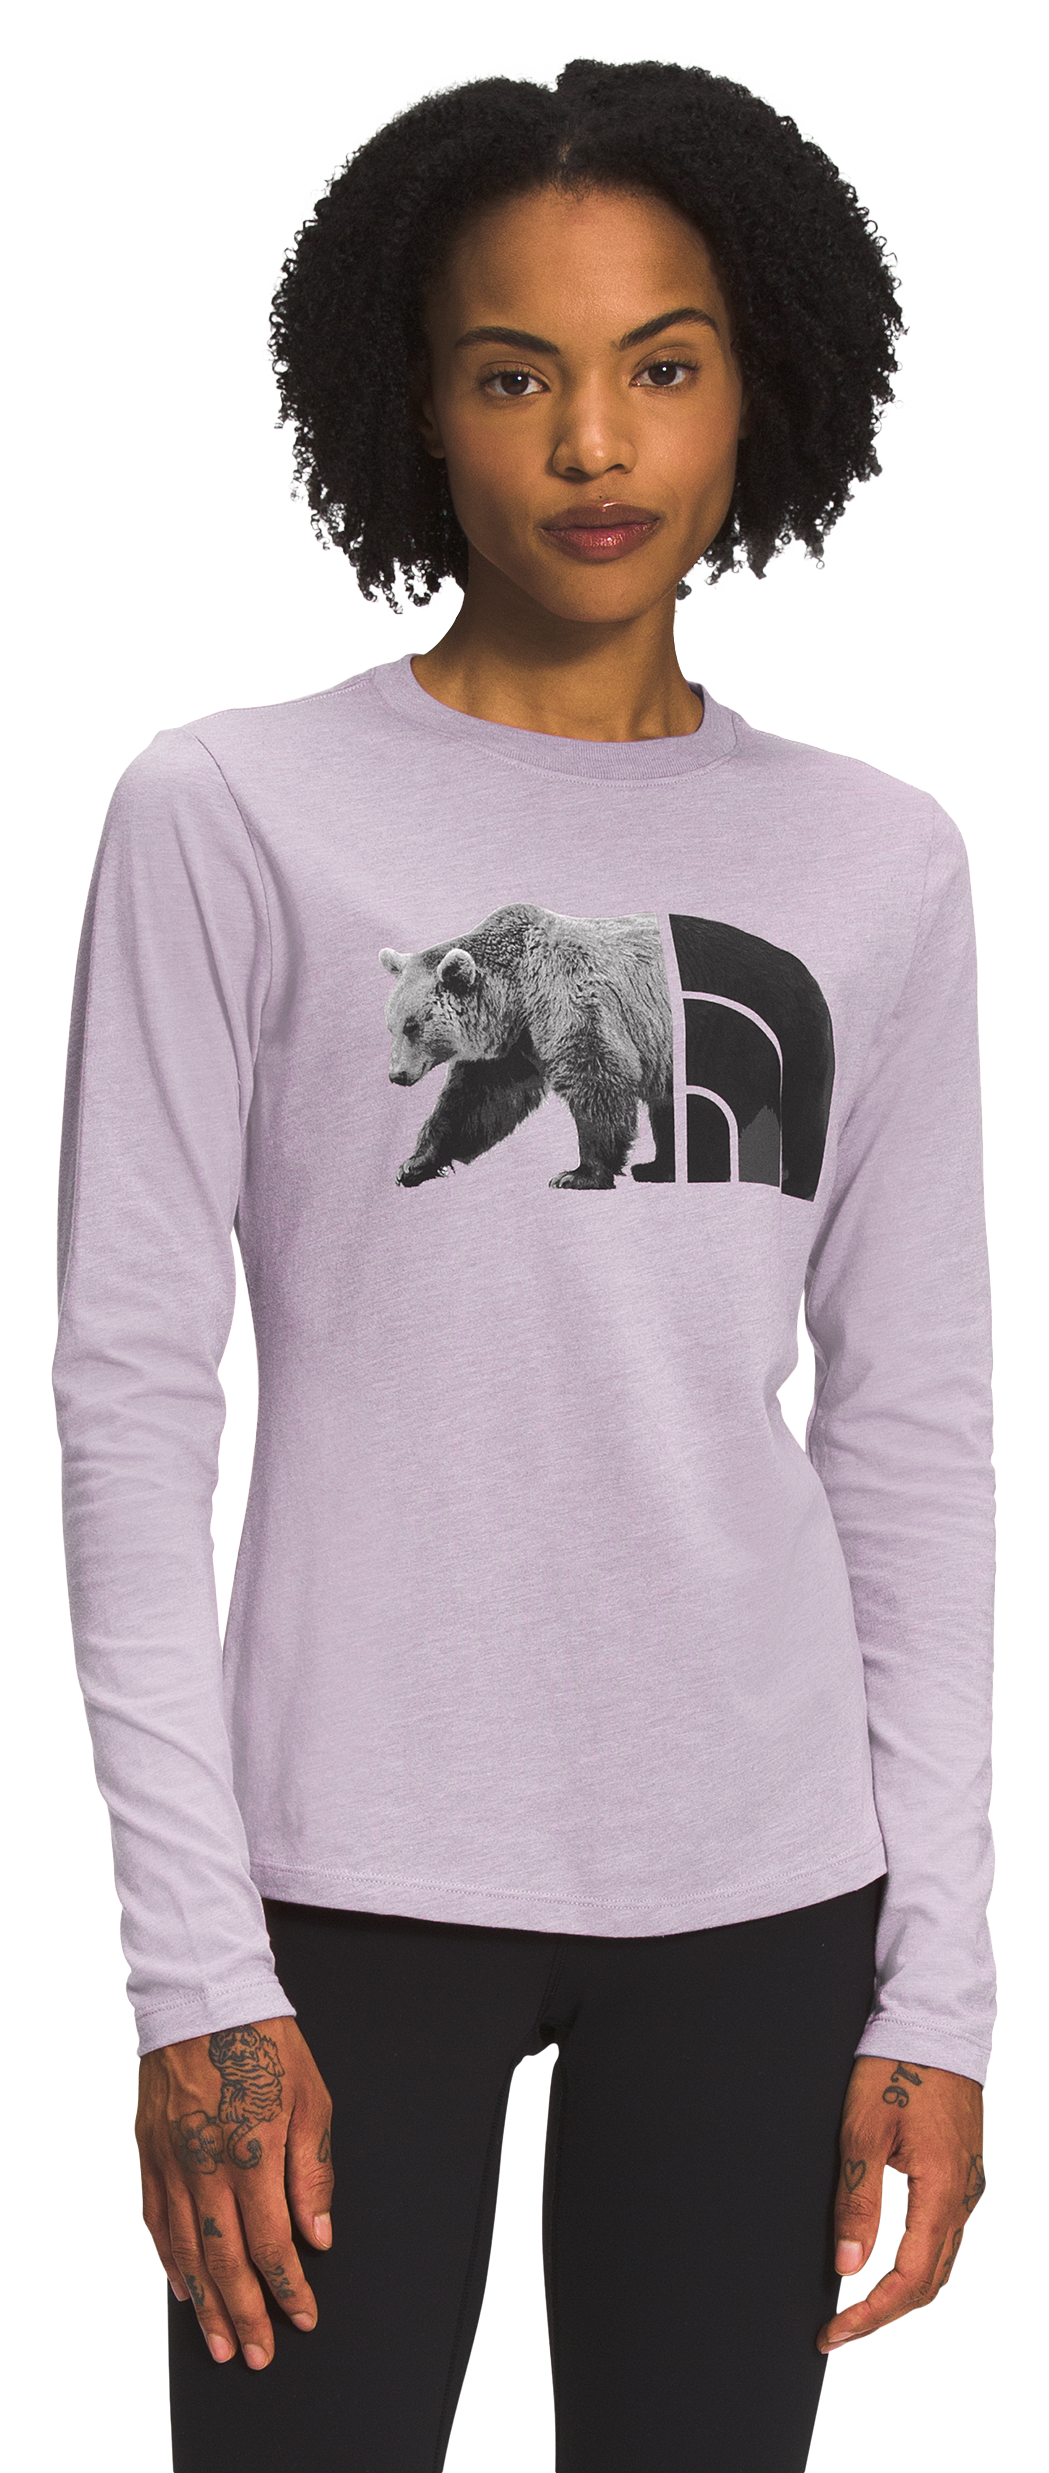 The North Face Tri-Blend Bear Long-Sleeve T-Shirt for Ladies - Lavender Fog Heather/TNF Black - S